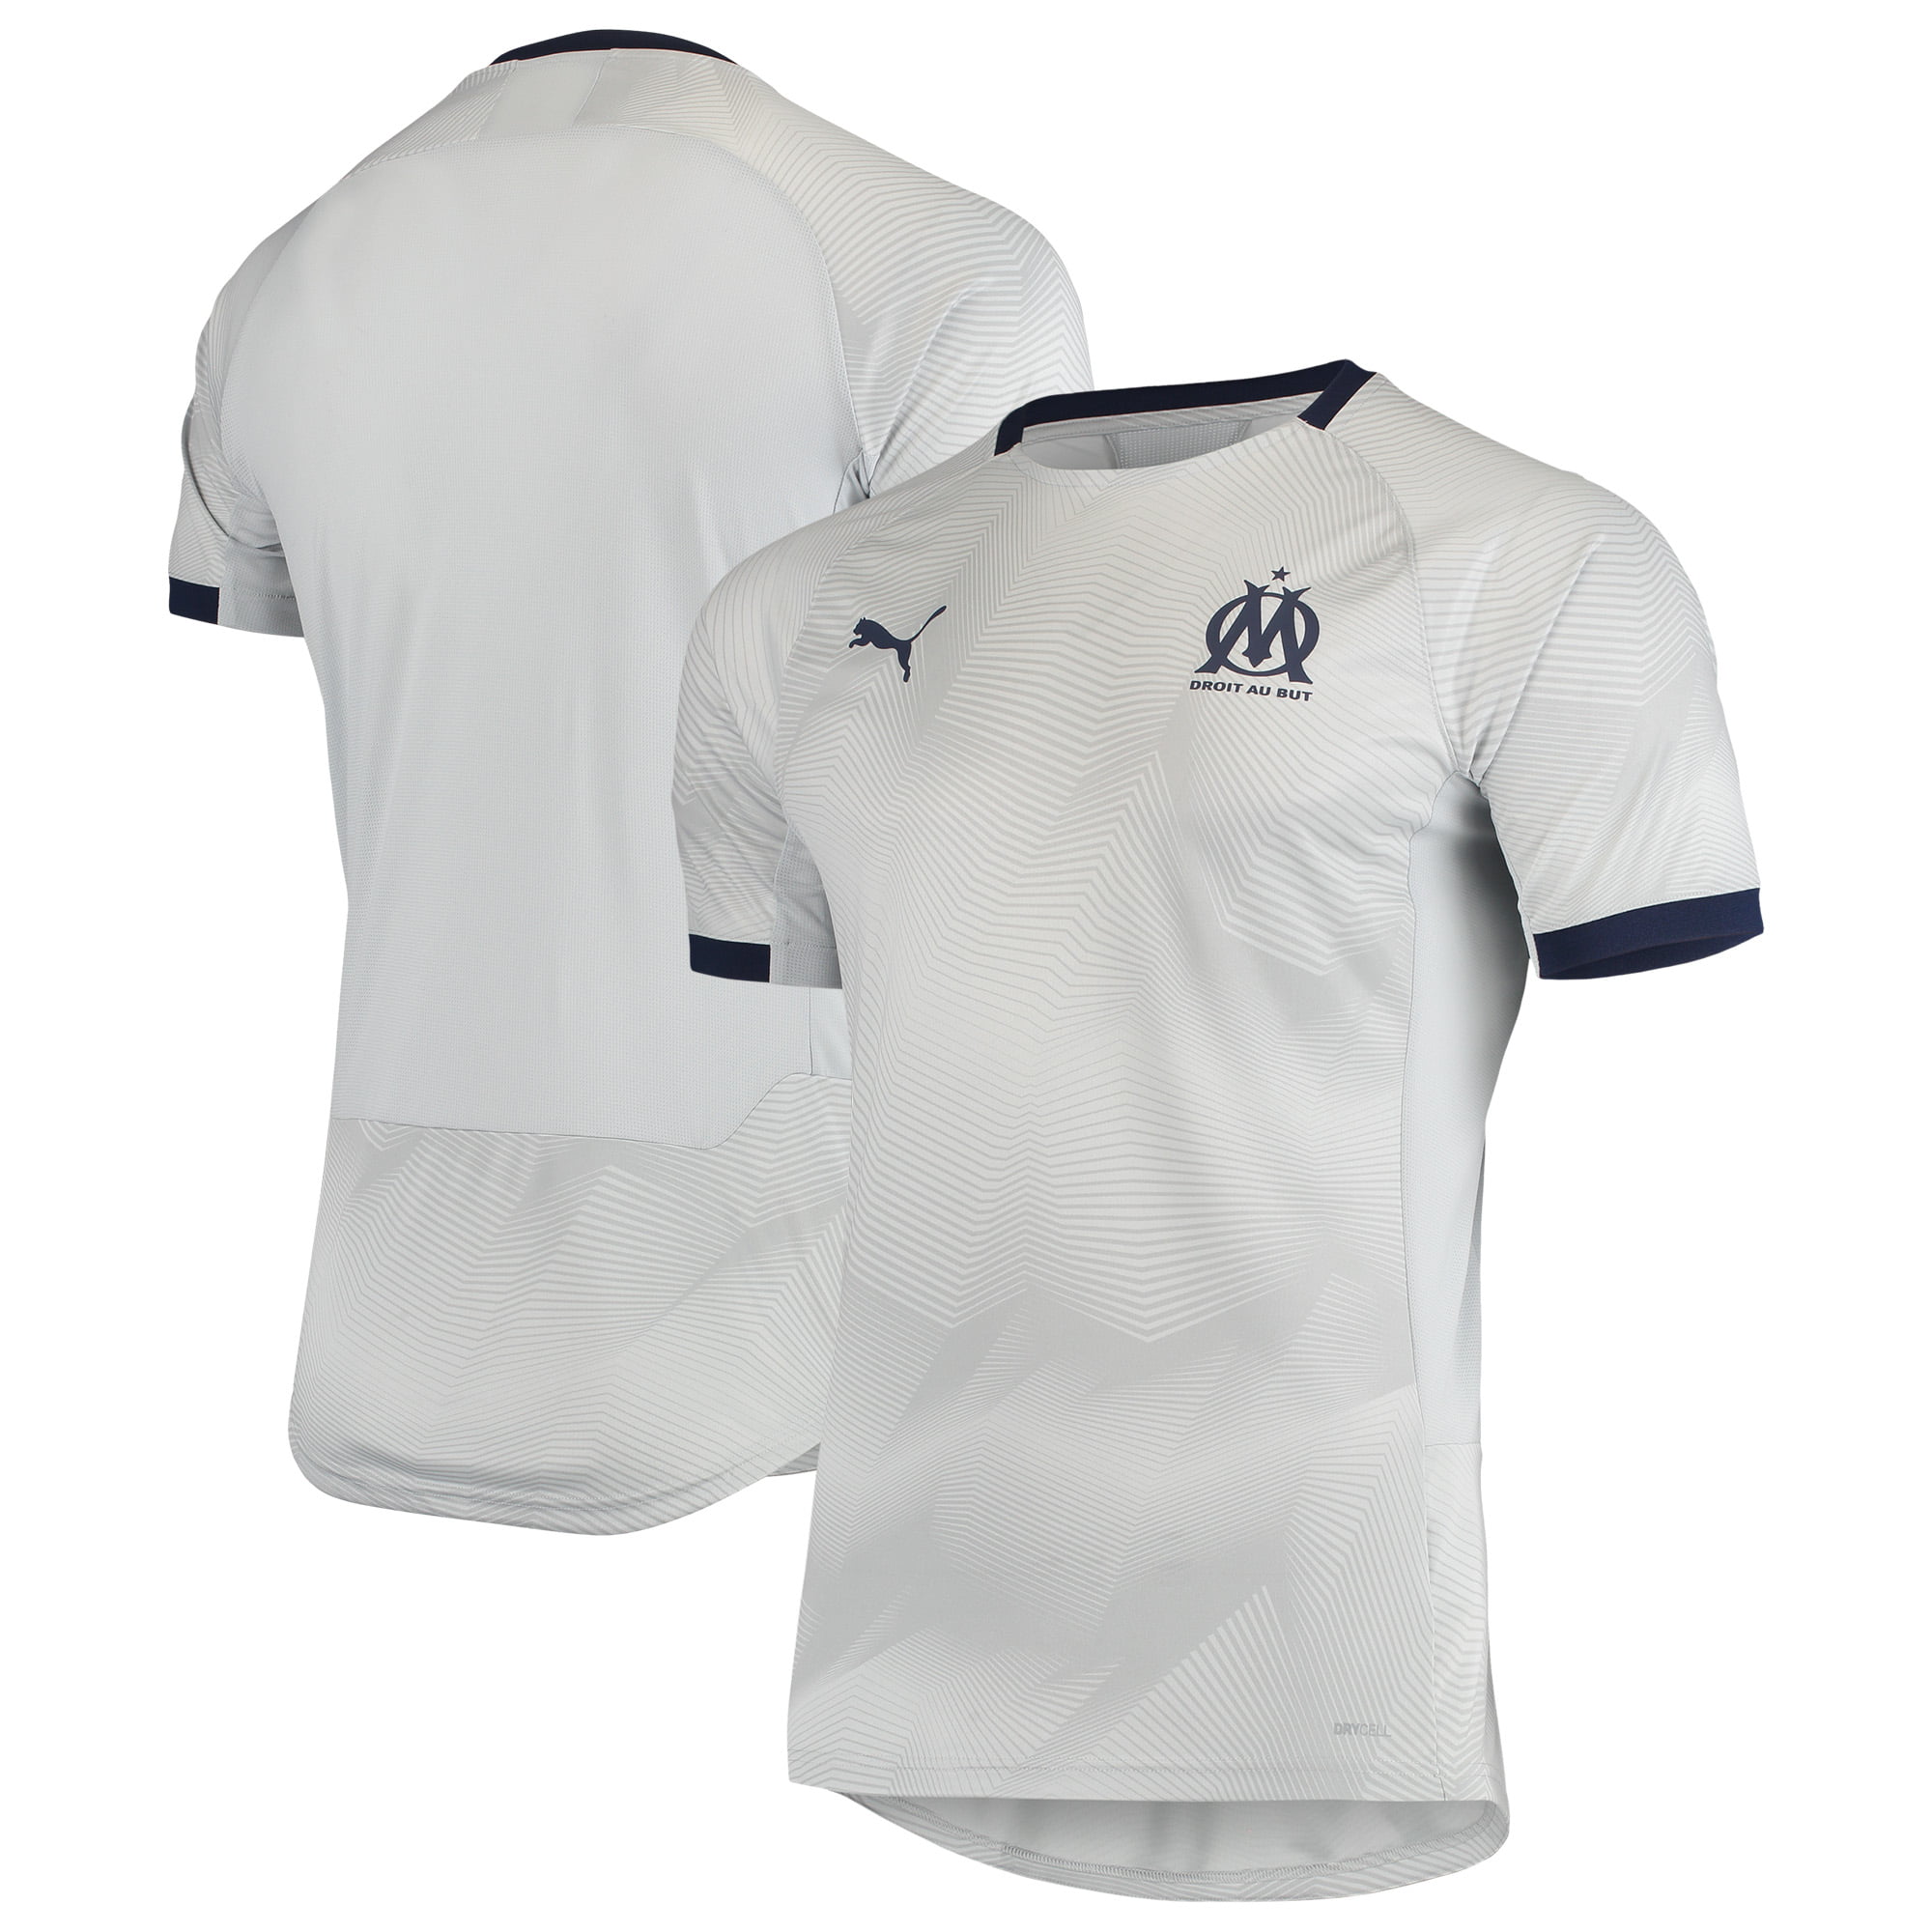 maillot entrainement om puma